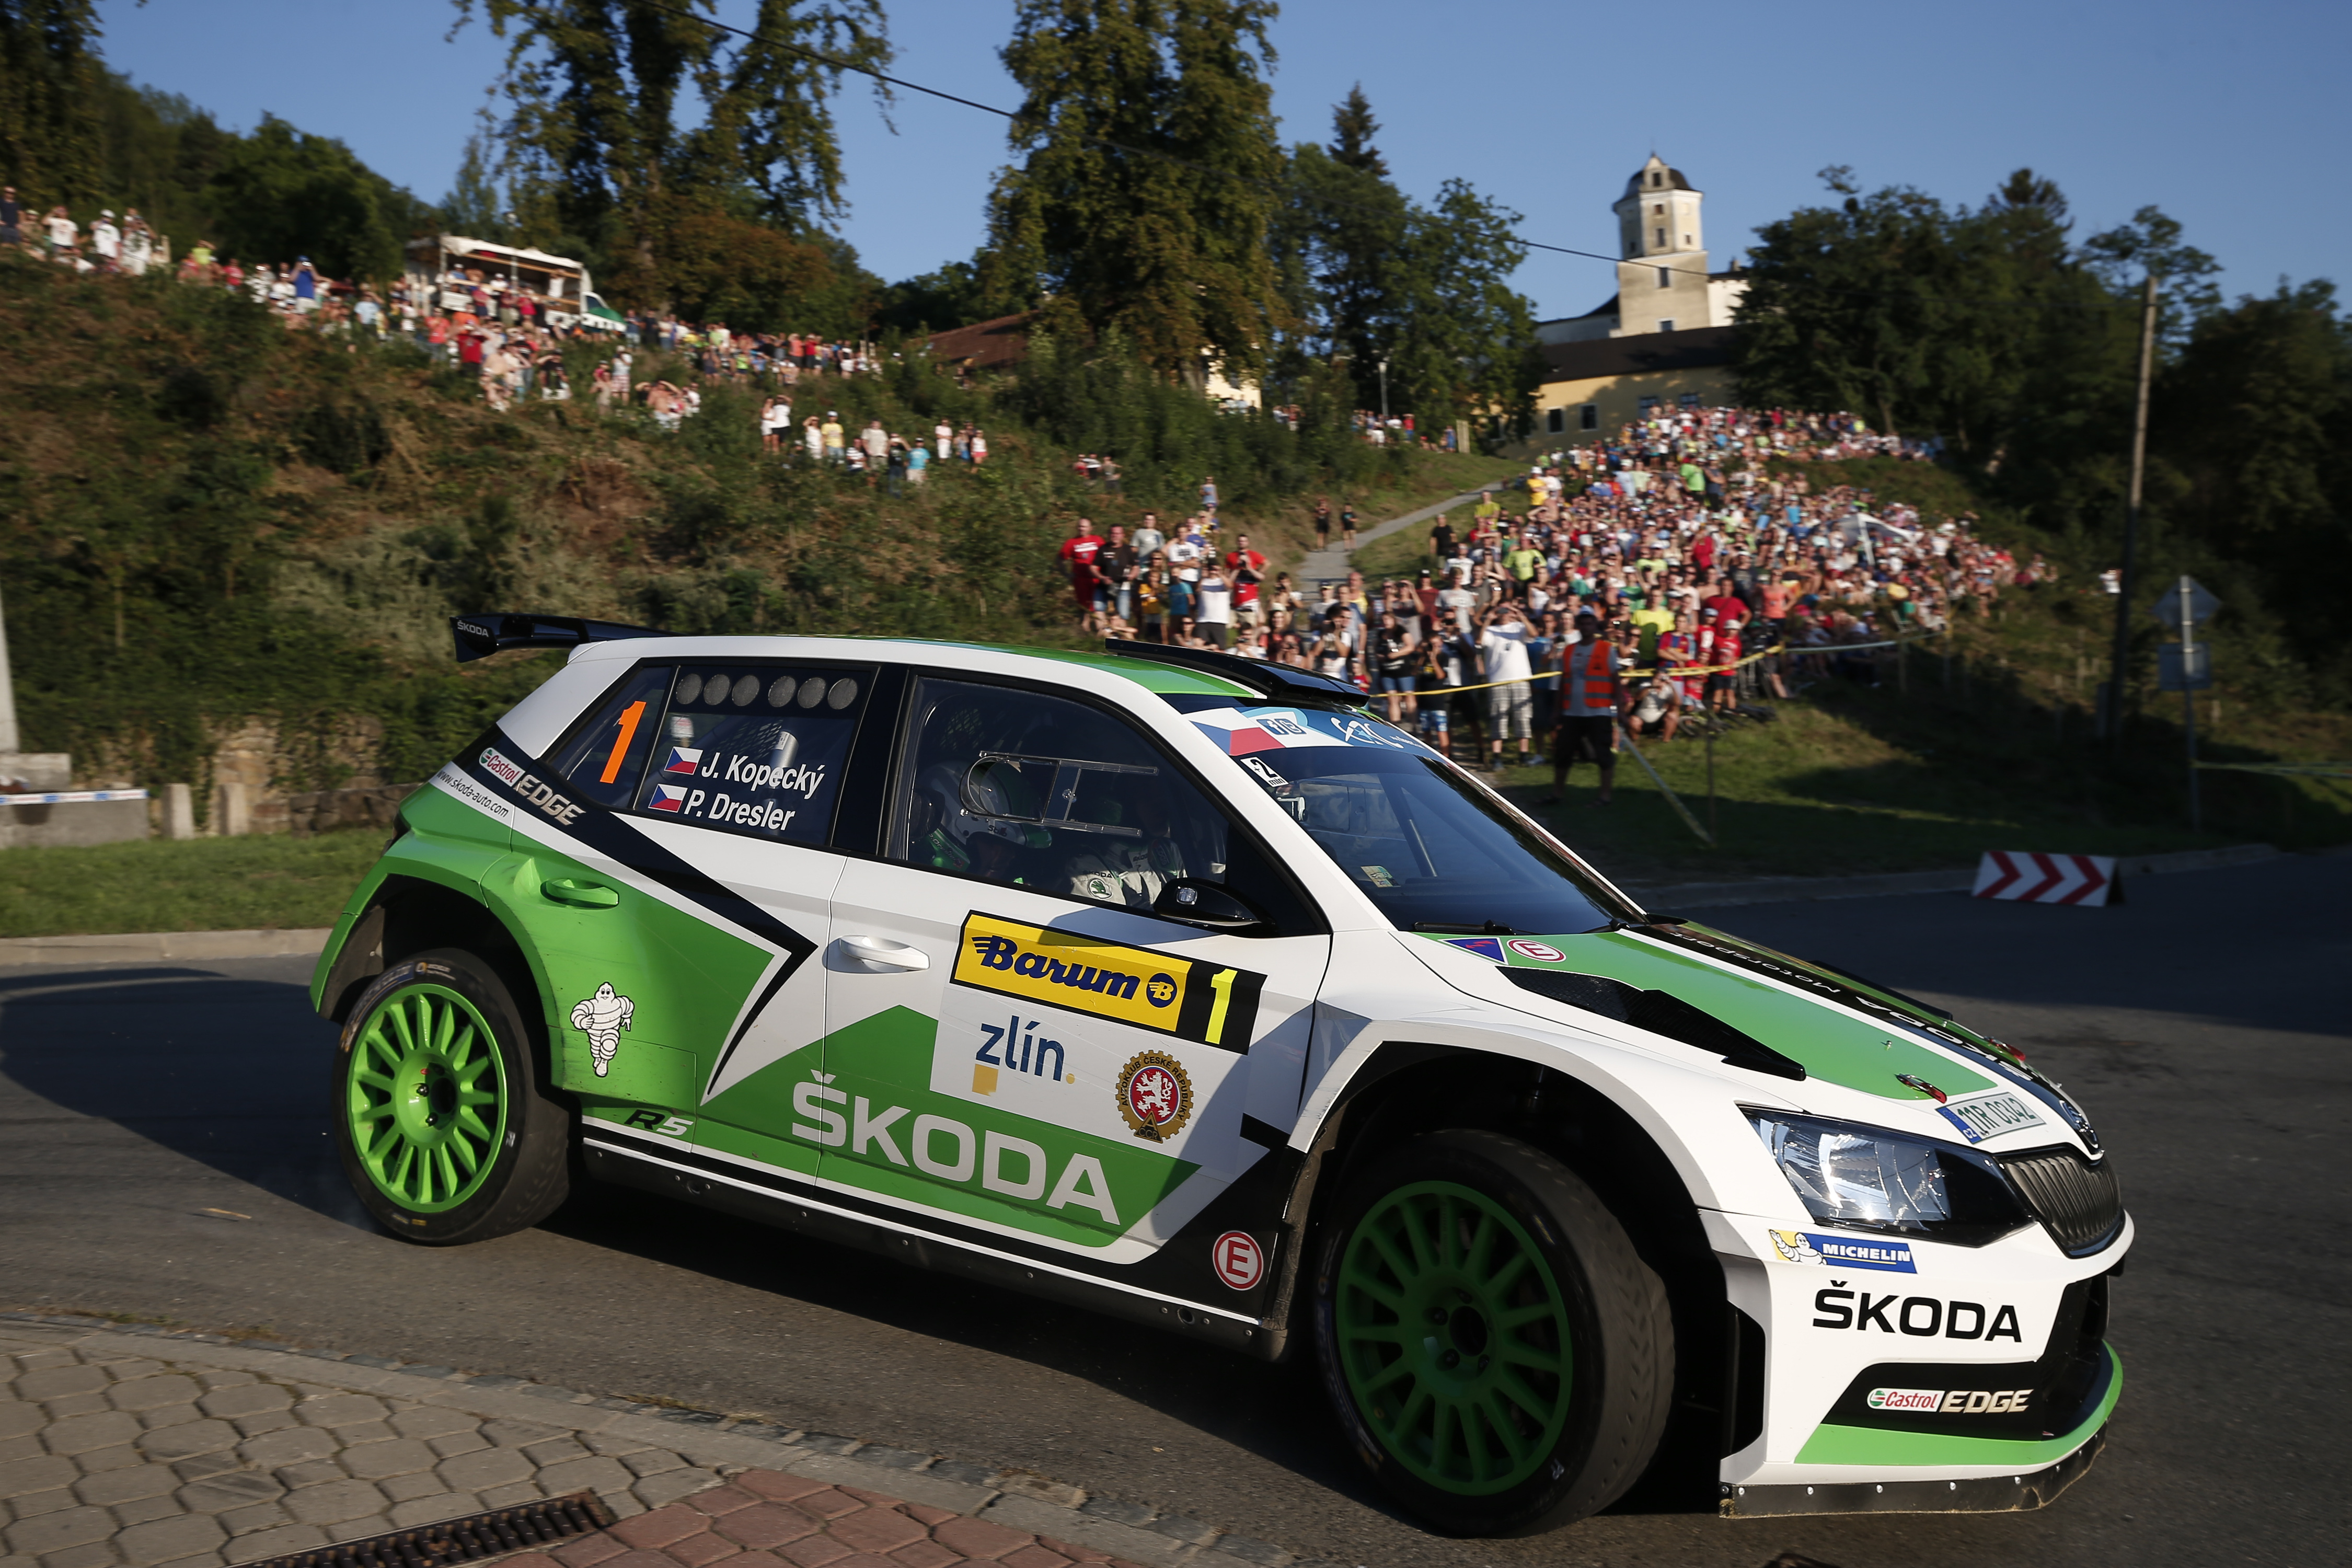 01 KOPECKY Jan DRESLER Pavel Skoda Fabia R5 Action during the 2015 European Rally Championship ERC Barum rally, from August 27 to 30th, at Zlin, Czech Republic. Photo Alexandre Guillaumot / DPPI